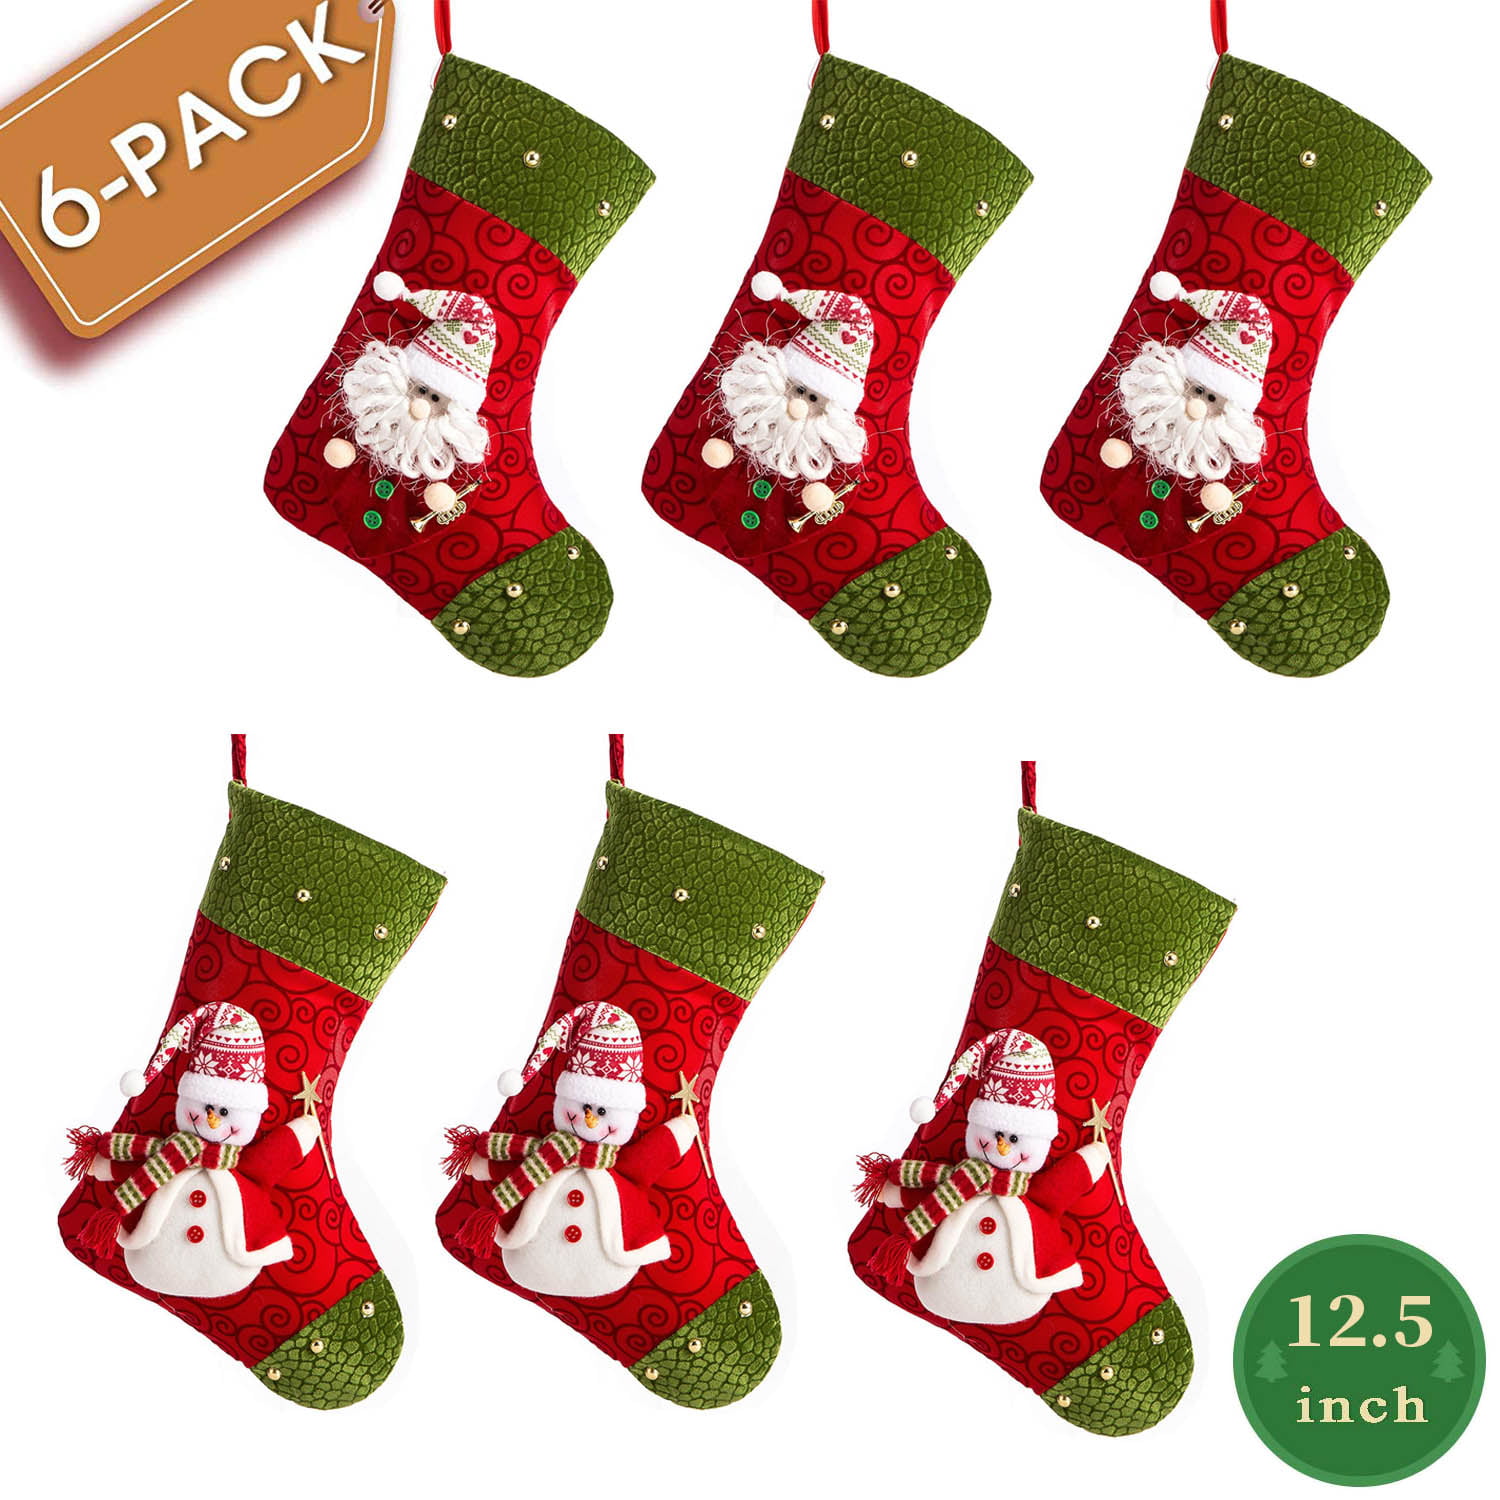 21 inches Polyester Classic Red and White Plush Mercerized Velvet Stockings for Home Holiday Xmas Party Fireplace Decorations DearHouse 4 Pack Christmas Stockings